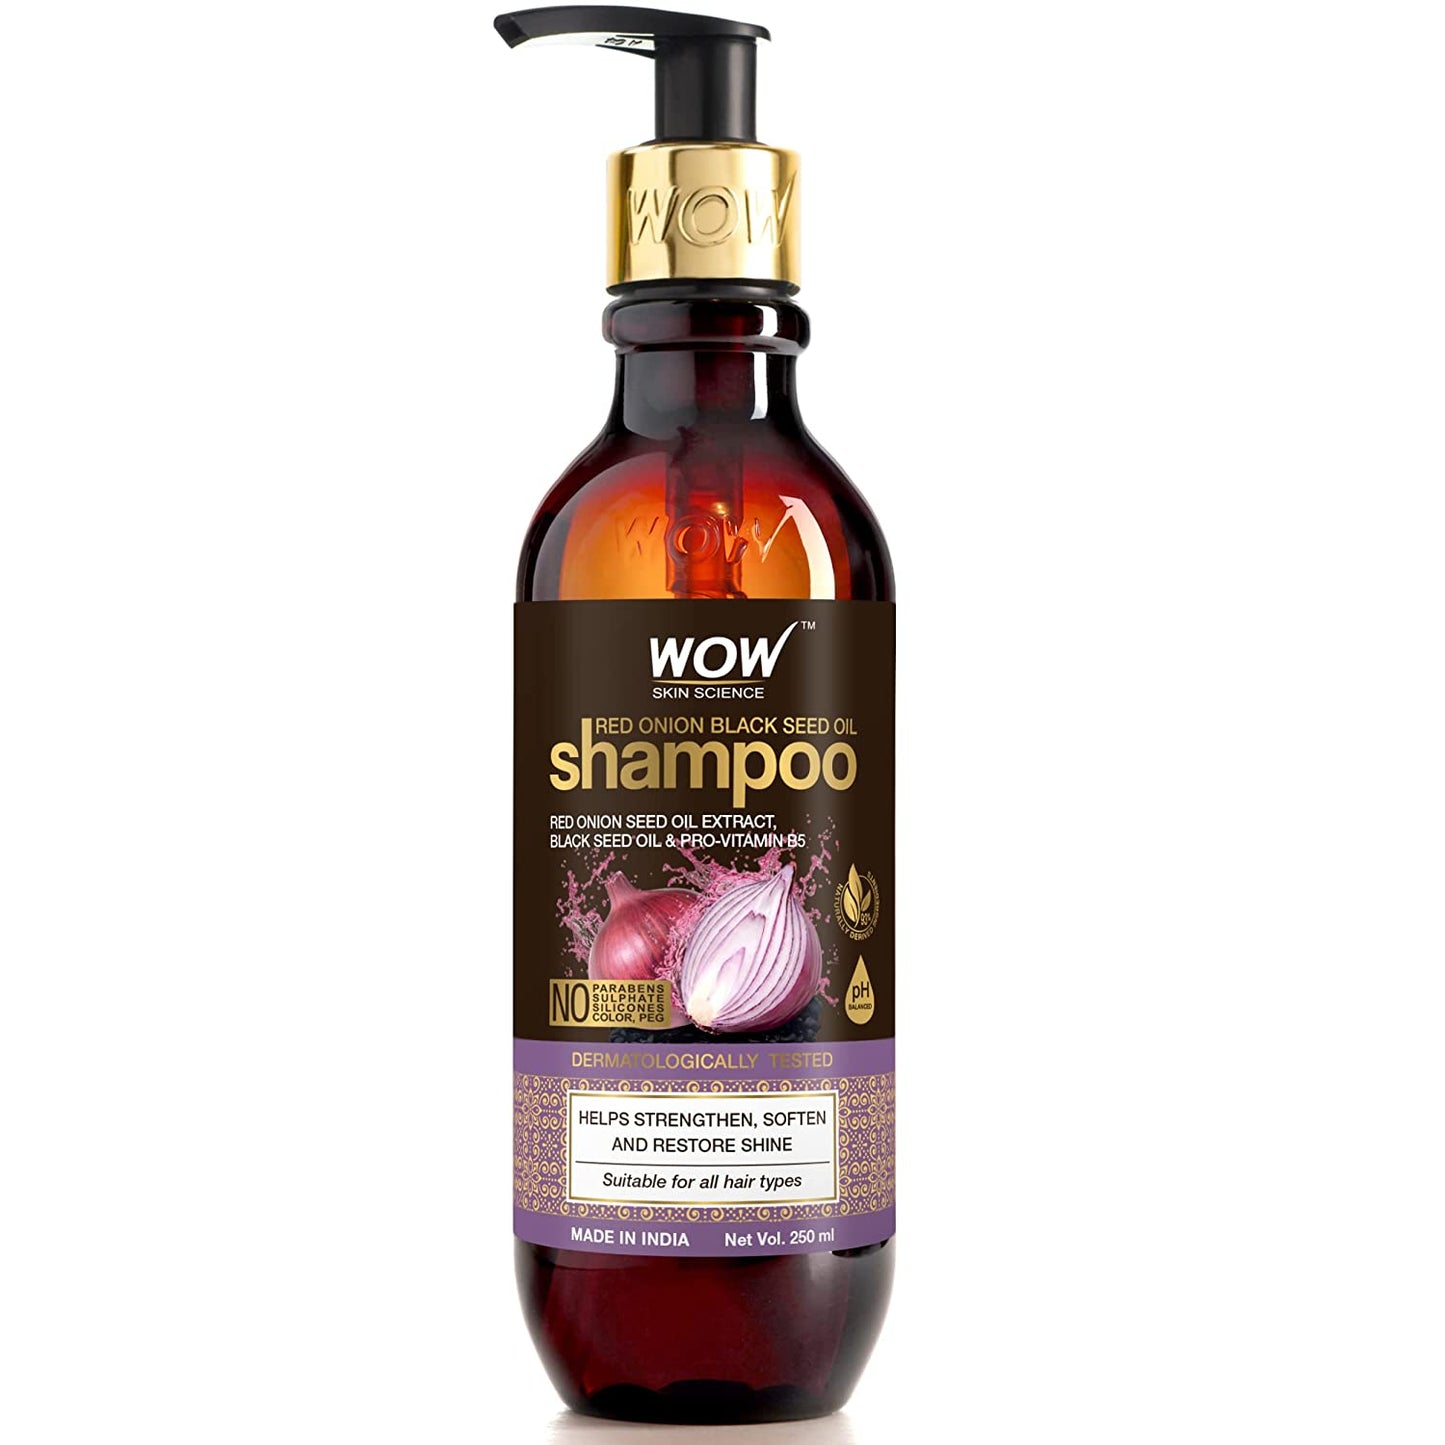 Wow Skin Science Red Onion Black Seed Oil Shampoo - BUDEN